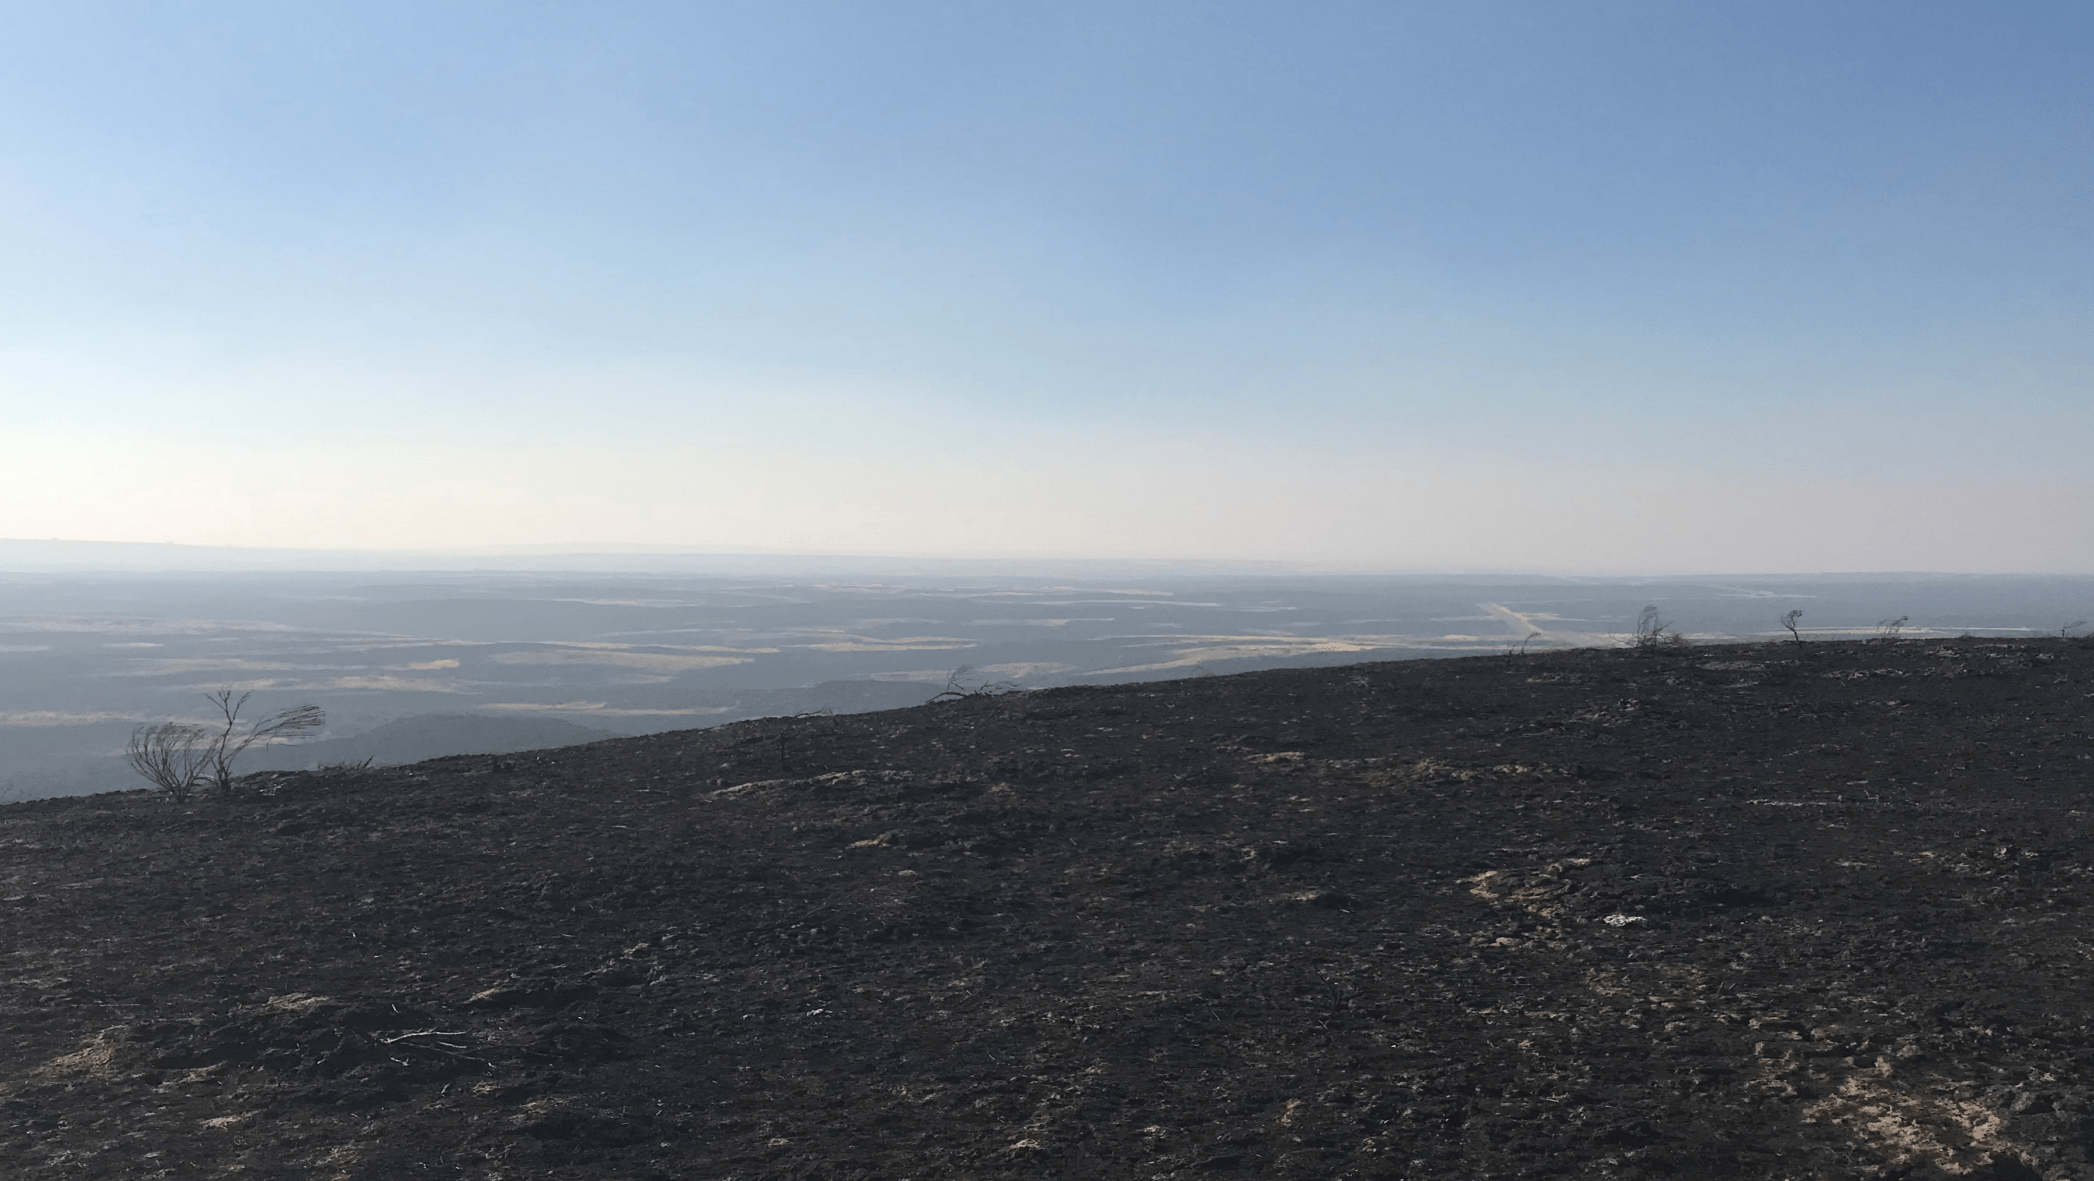 The Whitey fire burned so hot through the Swanson Lakes Wildlife Area in eastern Washington’s Channeled Scablands that it ignited power poles. Most of the area was severely burned. Courtesy of Kurt Merg